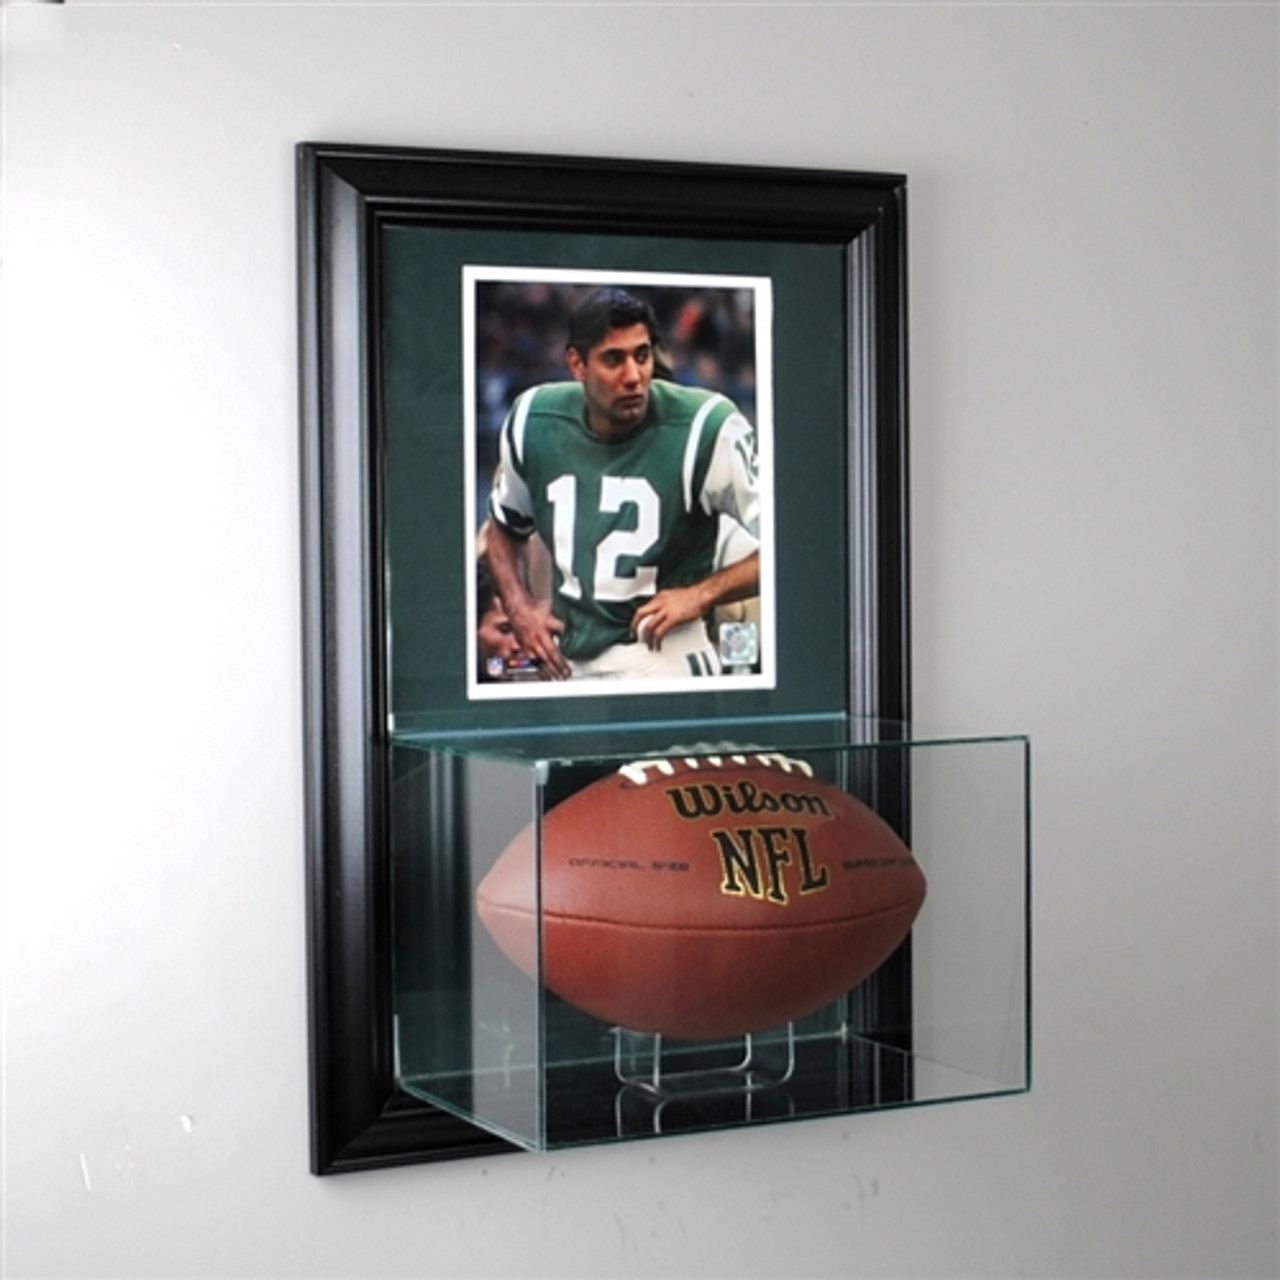 Wall Mounted Football Display Case with 8 x 10